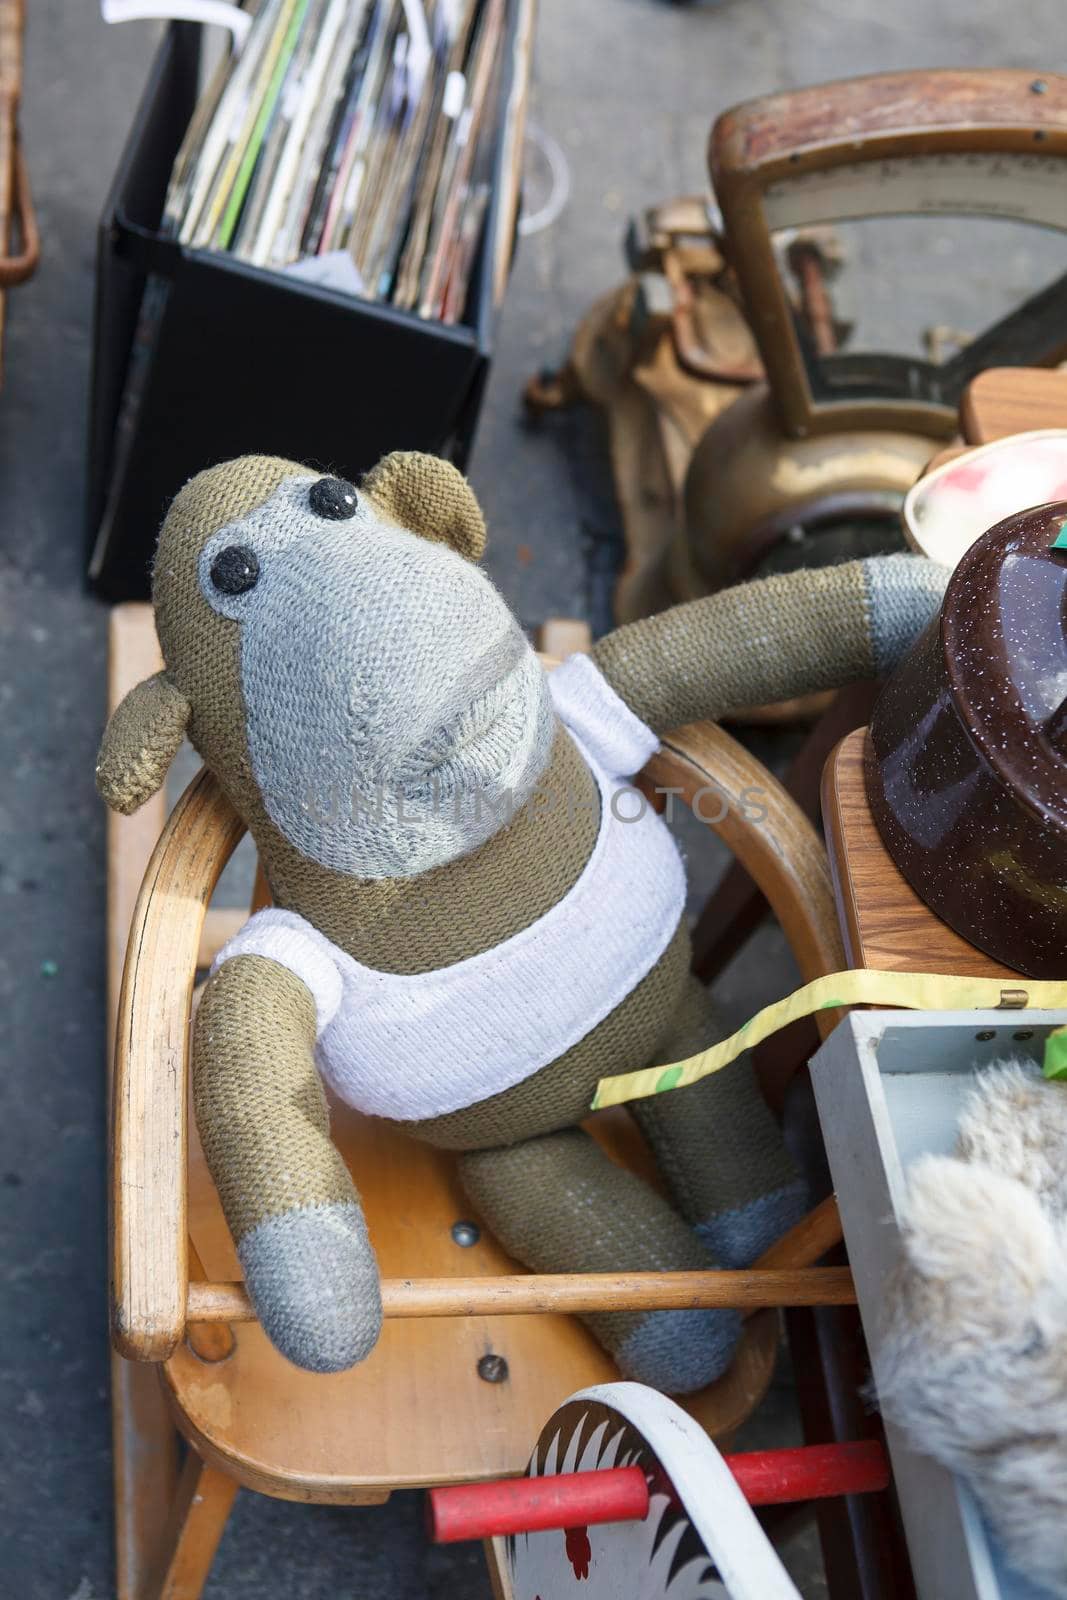 London, UK - 17 June 2019, Knitted monkey in a vest sits on a high chair on display Spitalfields vintage market